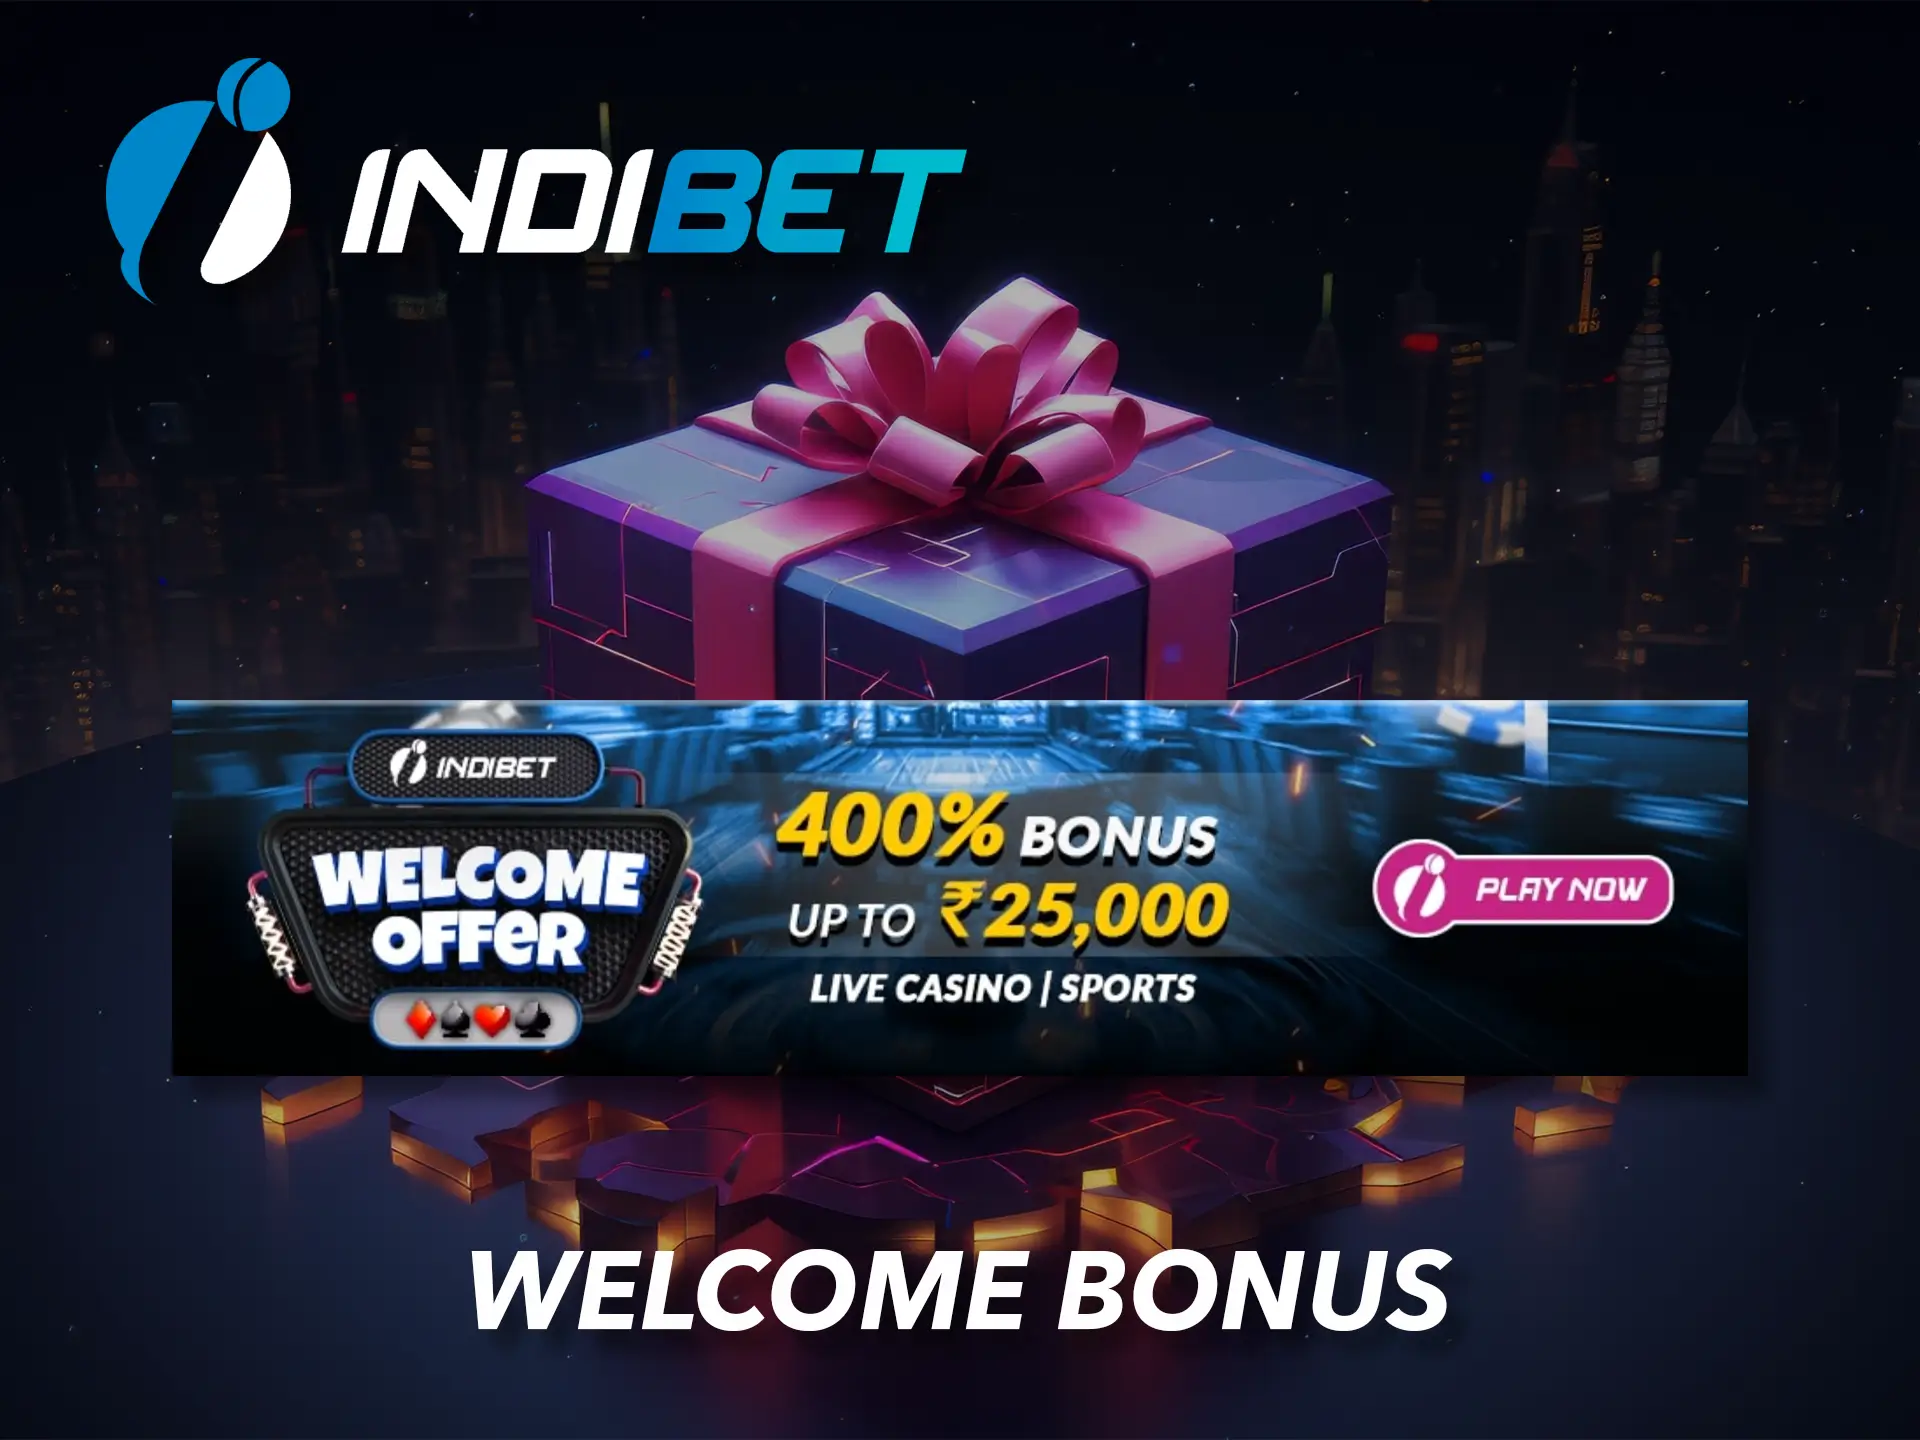 Get to know the welcome bonus from Indibet.